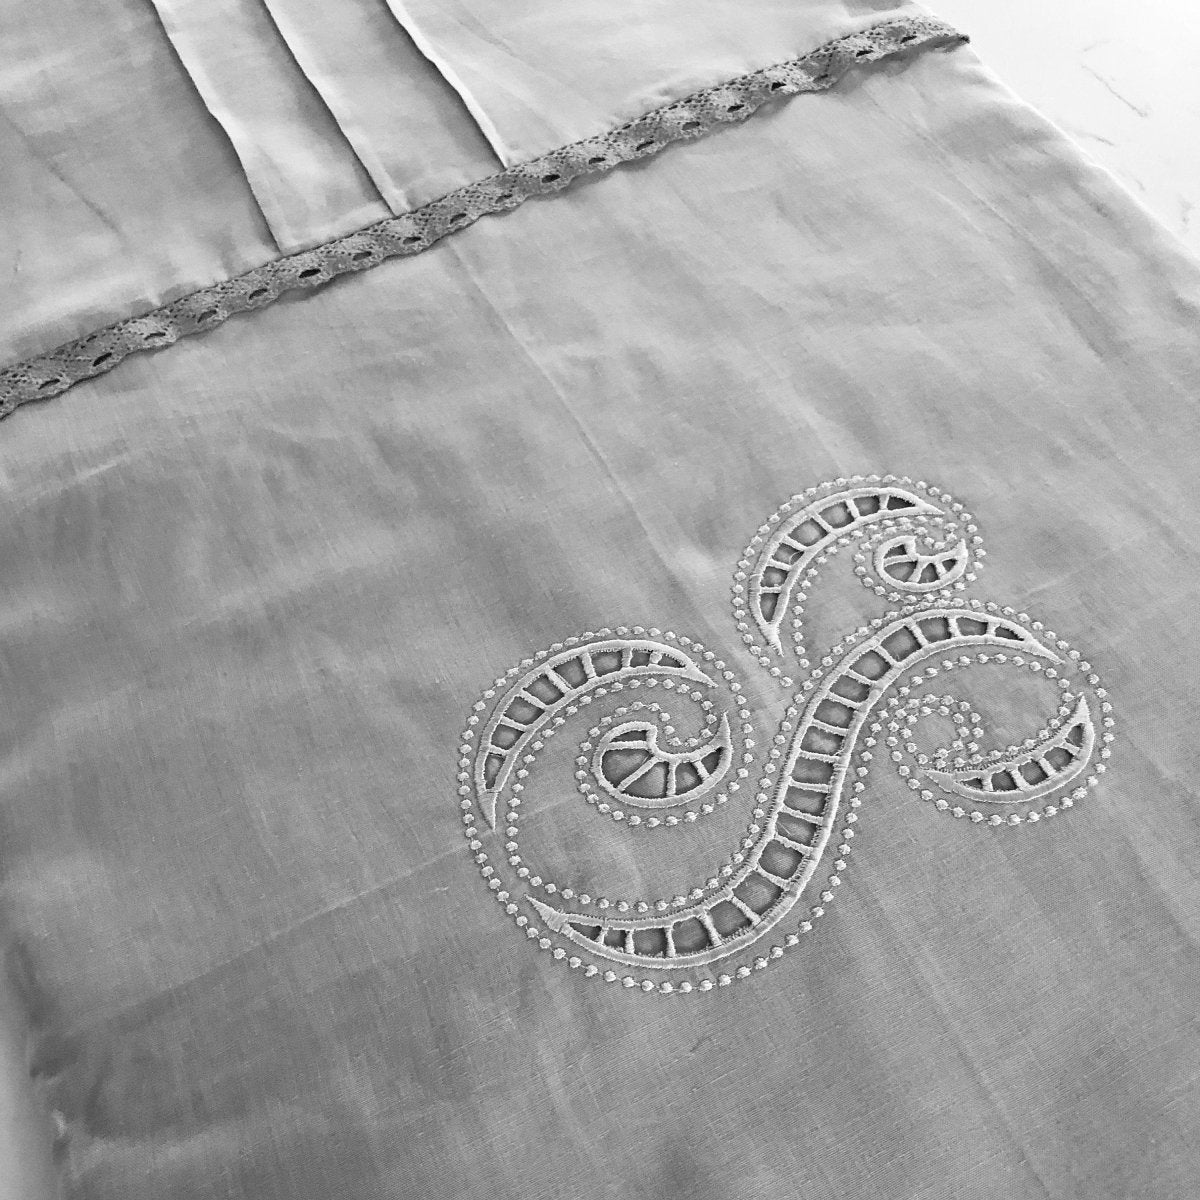 Linen Bed Runner with Cutwork or French Embroidered Monogram - Linen and Letters